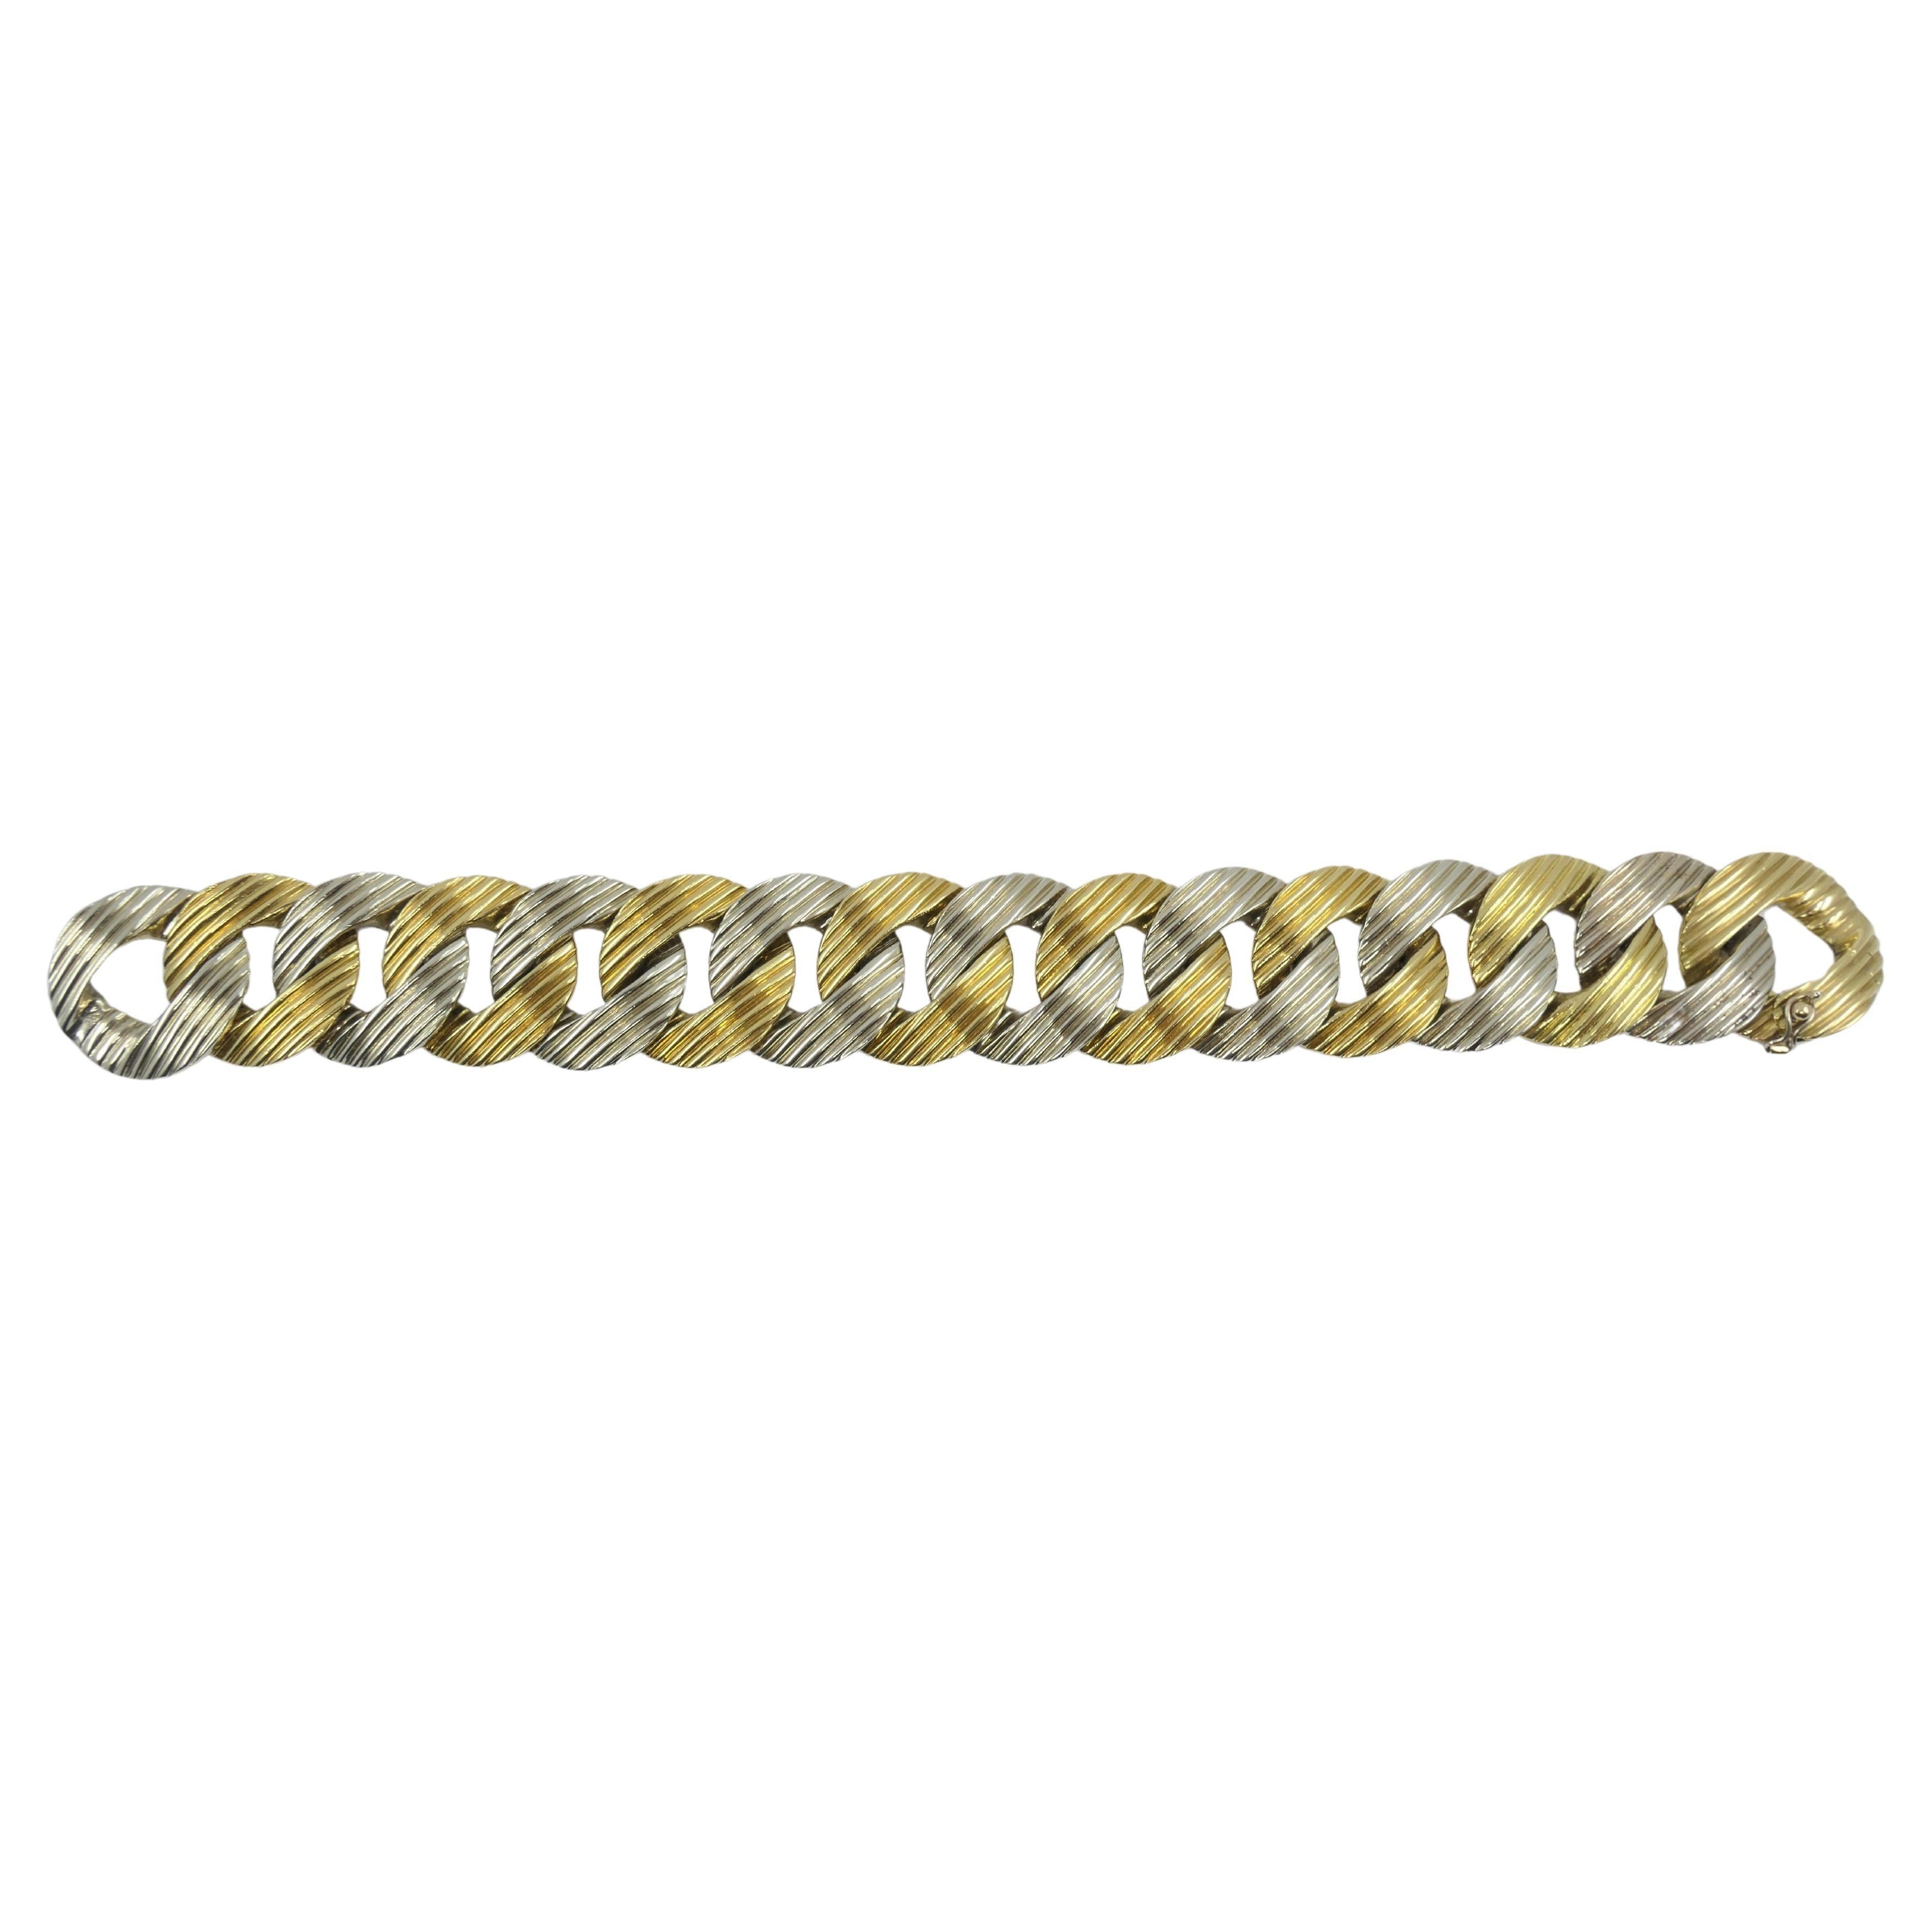 A chunky Pomellato bracelet made of 18k yellow and and white gold. The links are greatly textured, which add even more significance to a substantial look. To match the tone of the white gold, the yellow gold hue is subdued and not too bright or